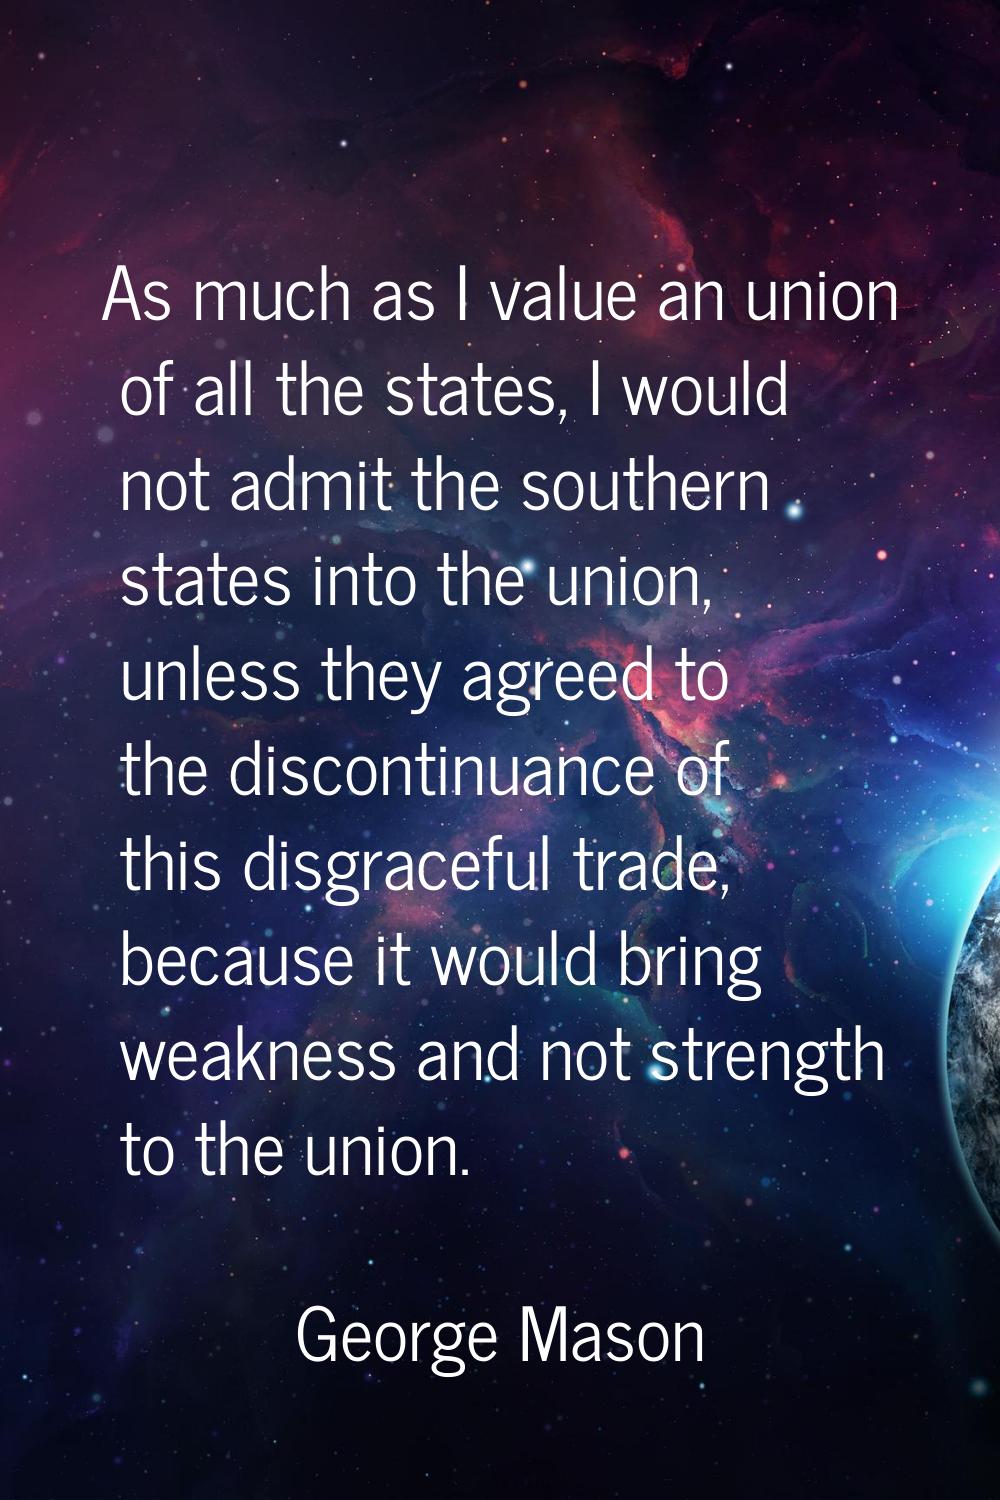 As much as I value an union of all the states, I would not admit the southern states into the union